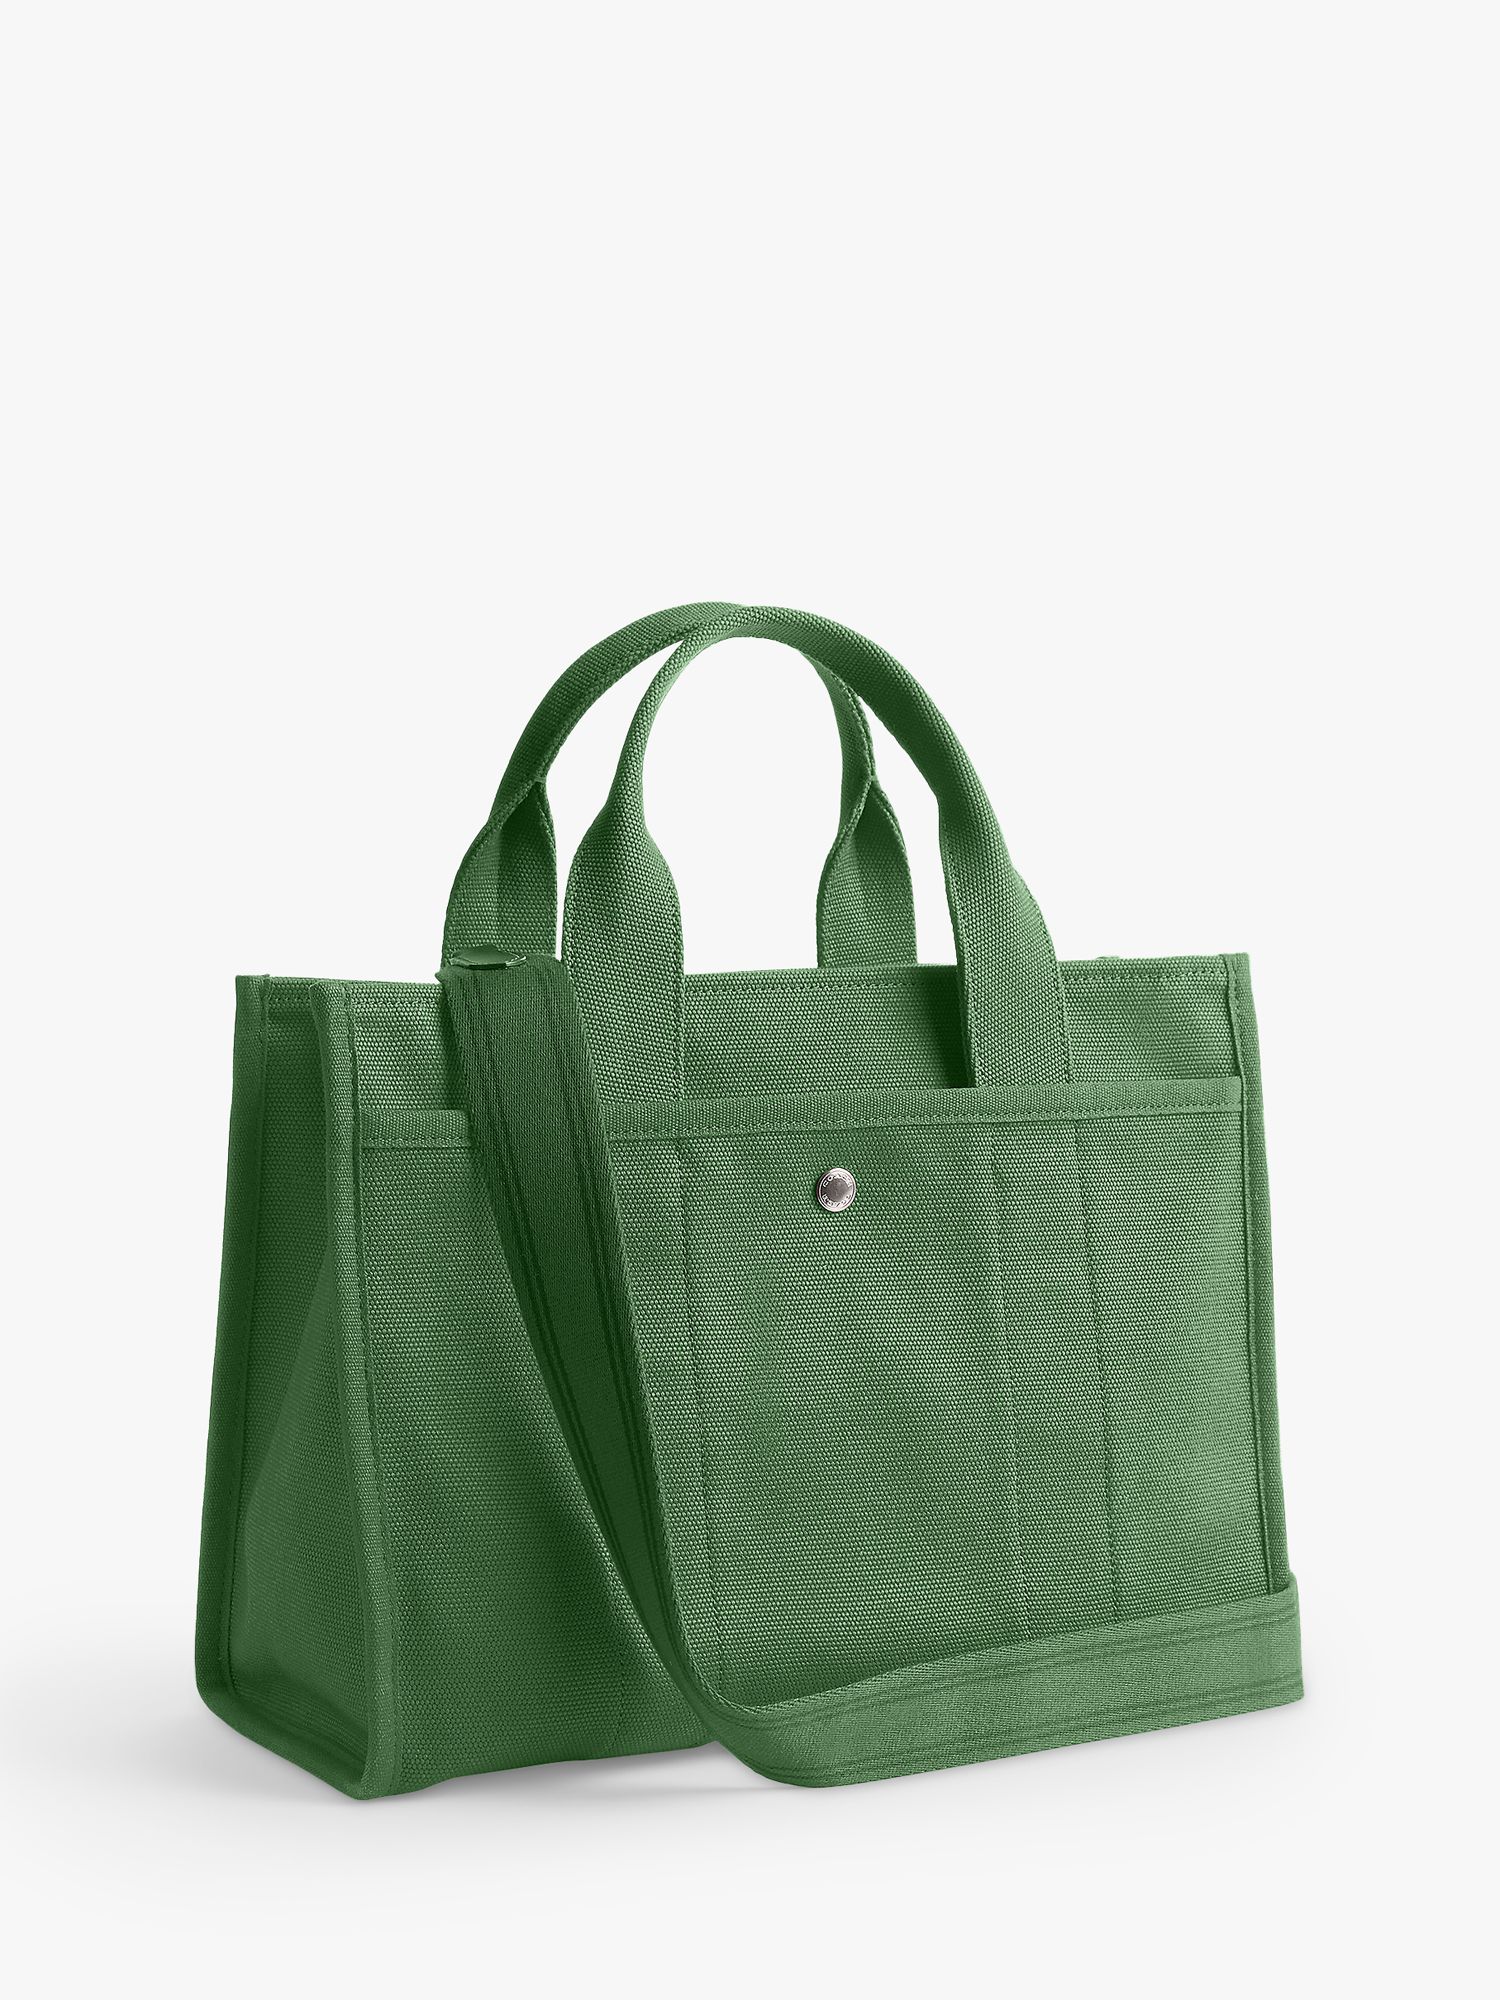 Coach Cargo Tote Bag, Soft Green at John Lewis & Partners